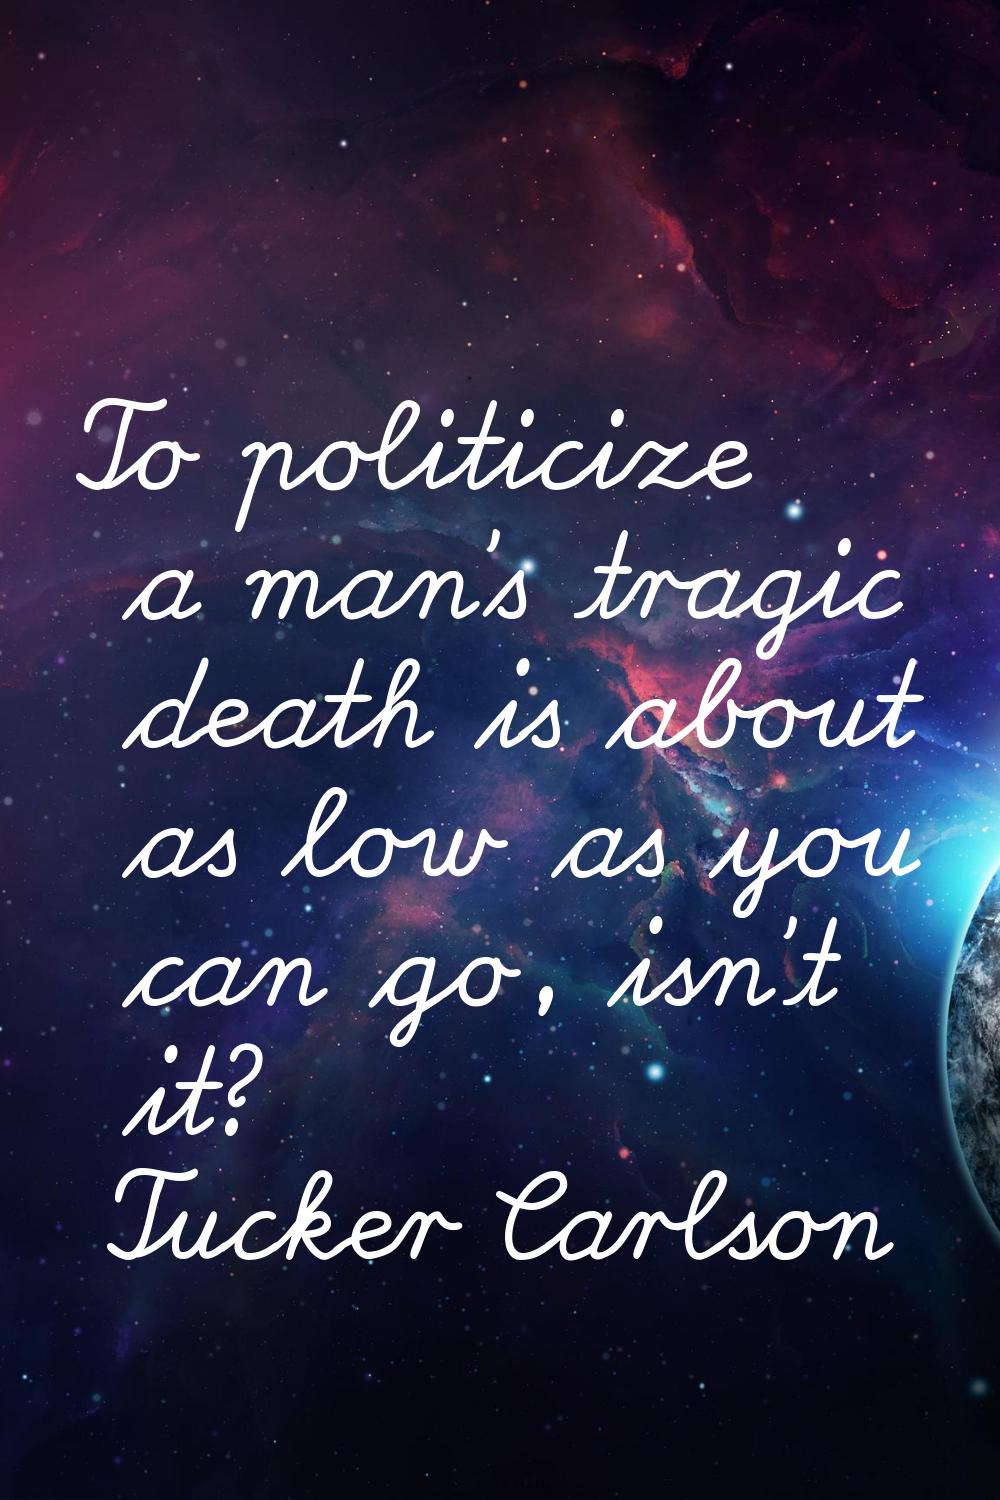 To politicize a man's tragic death is about as low as you can go, isn't it?